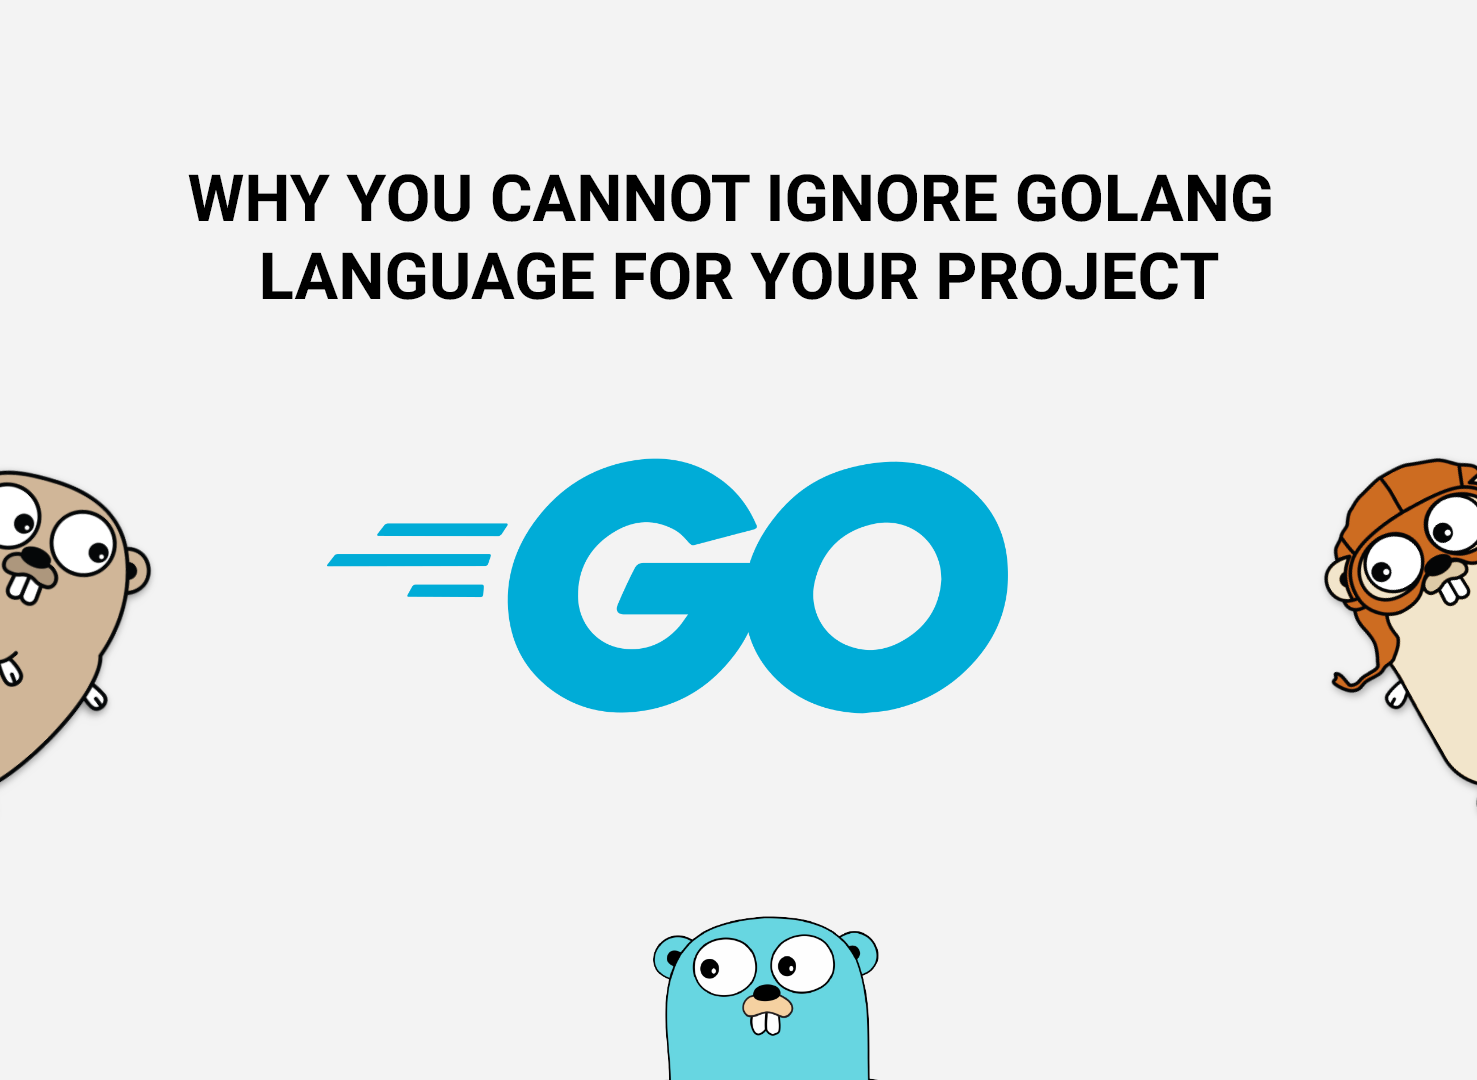 Why You Cannot Ignore the Golang Language for Your Project?